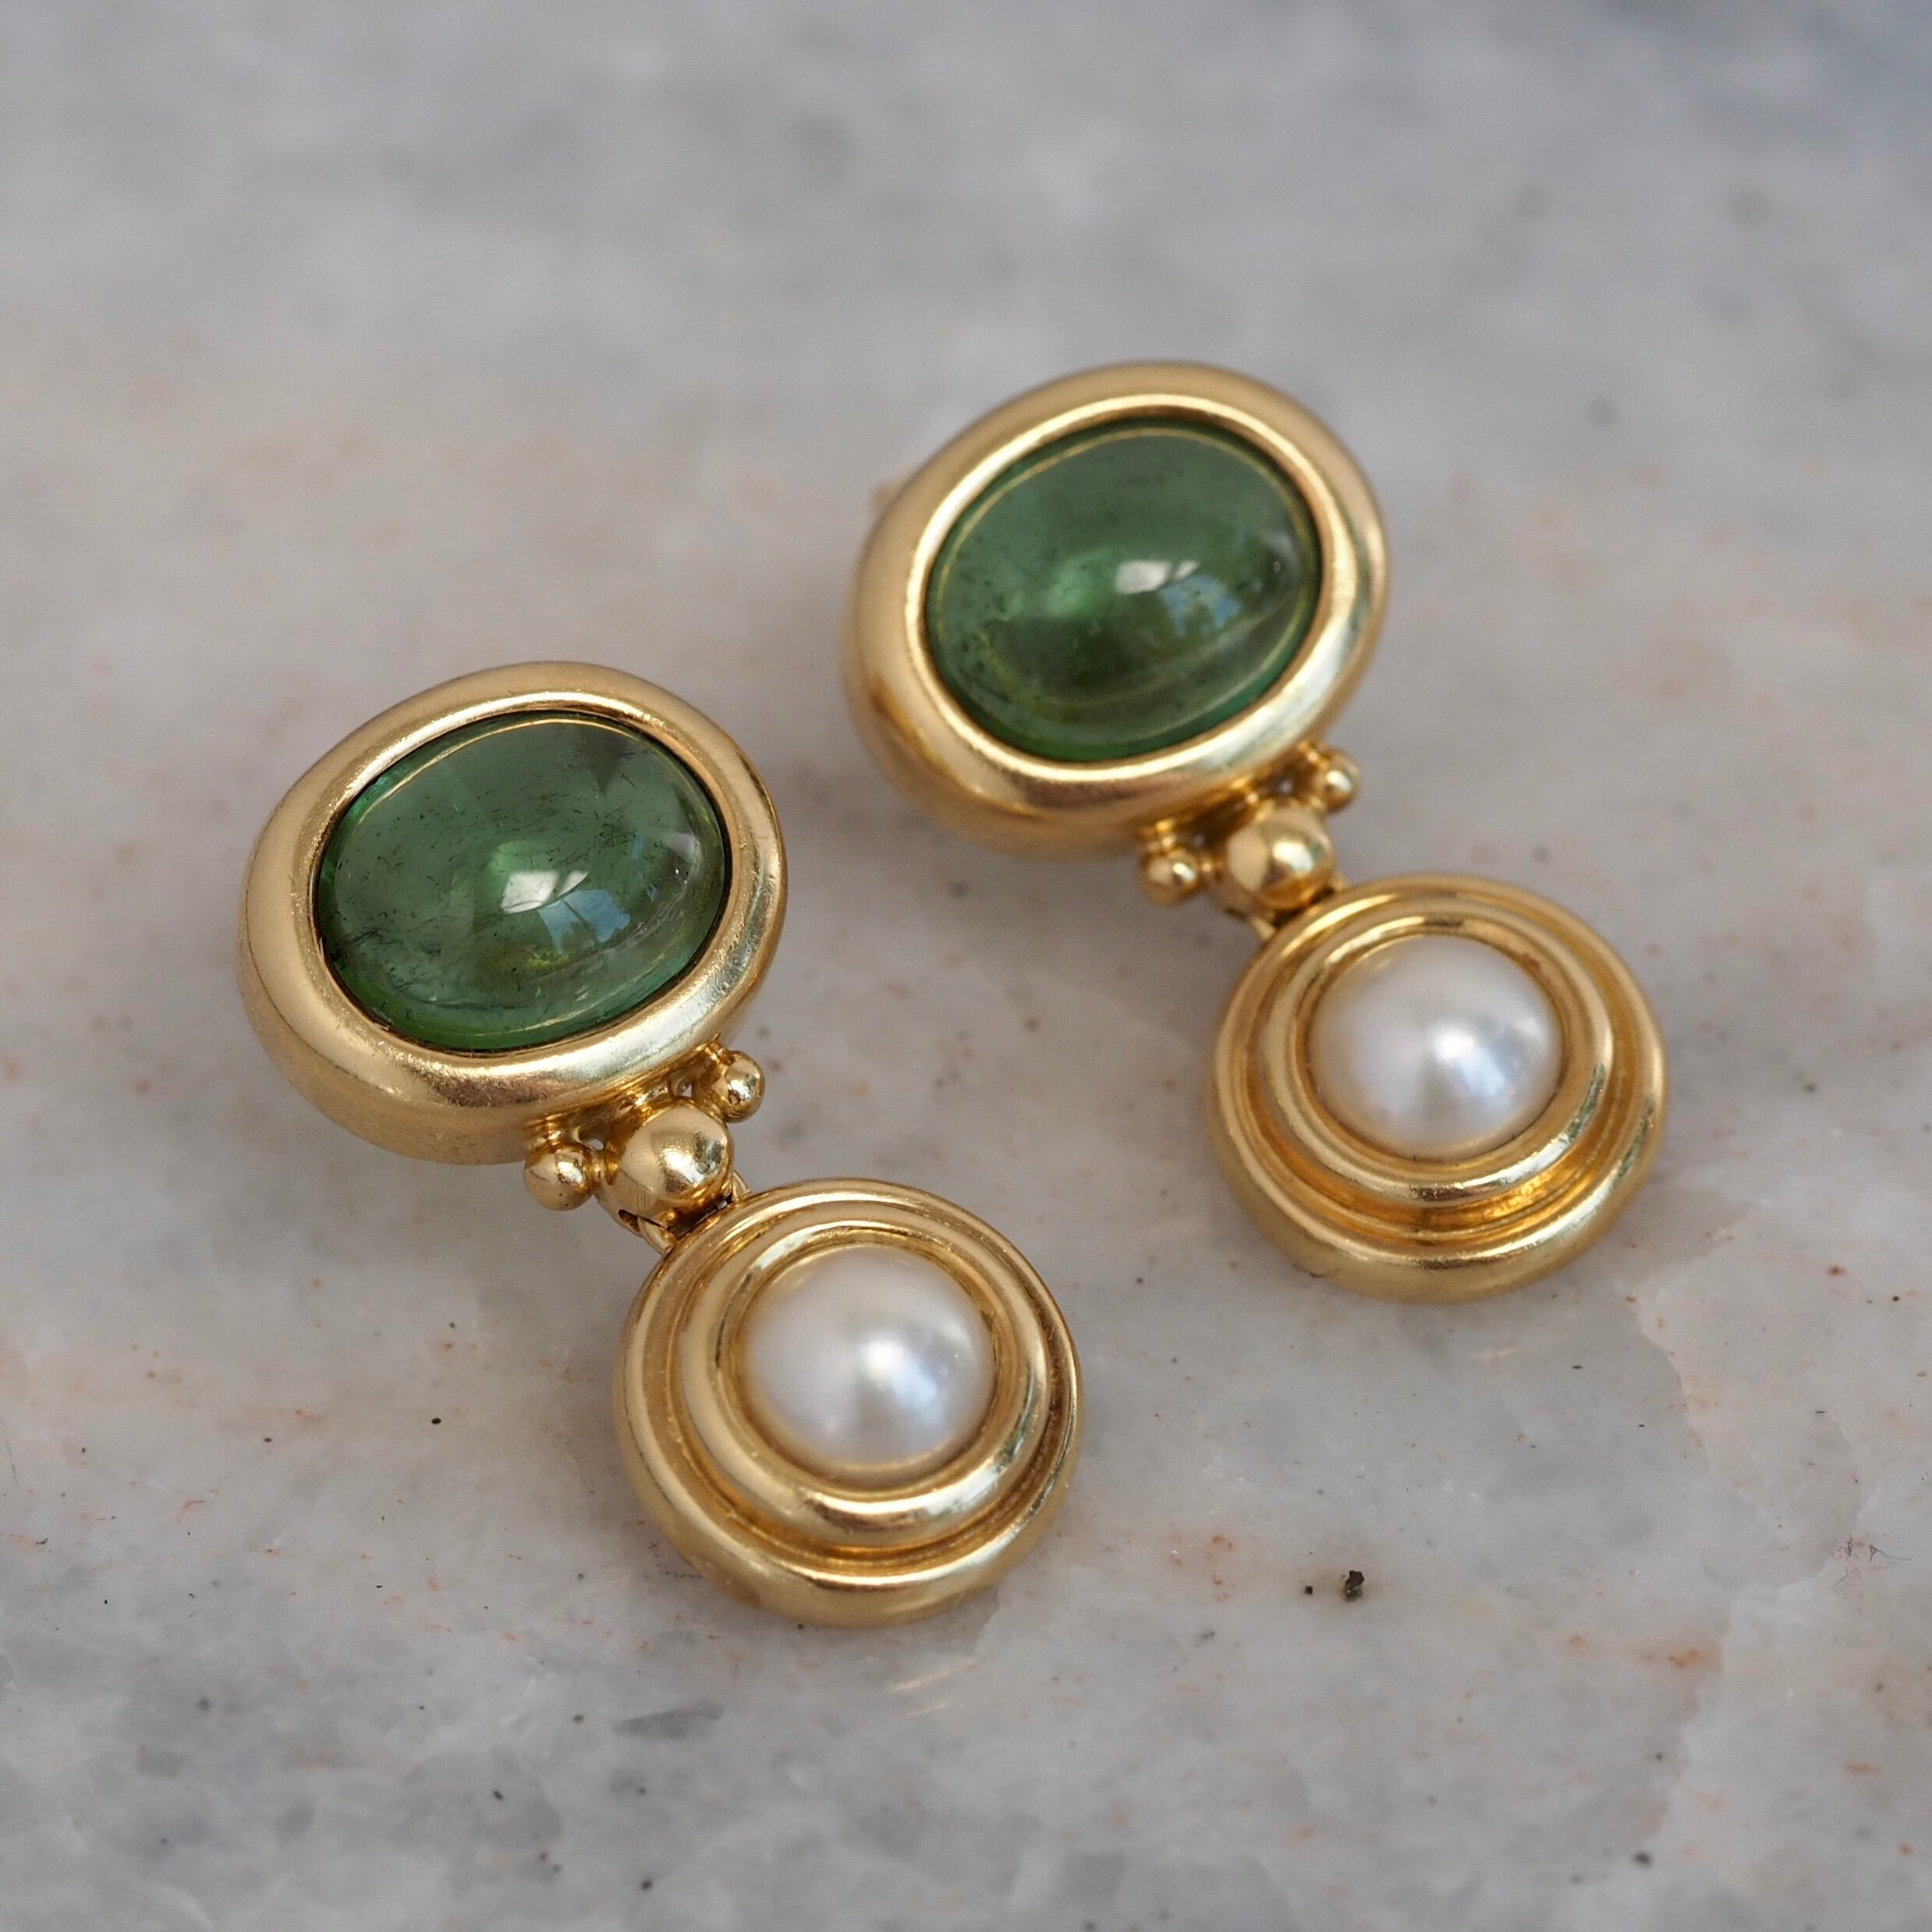 Vintage 18k Gold Tourmaline and Pearl Earrings